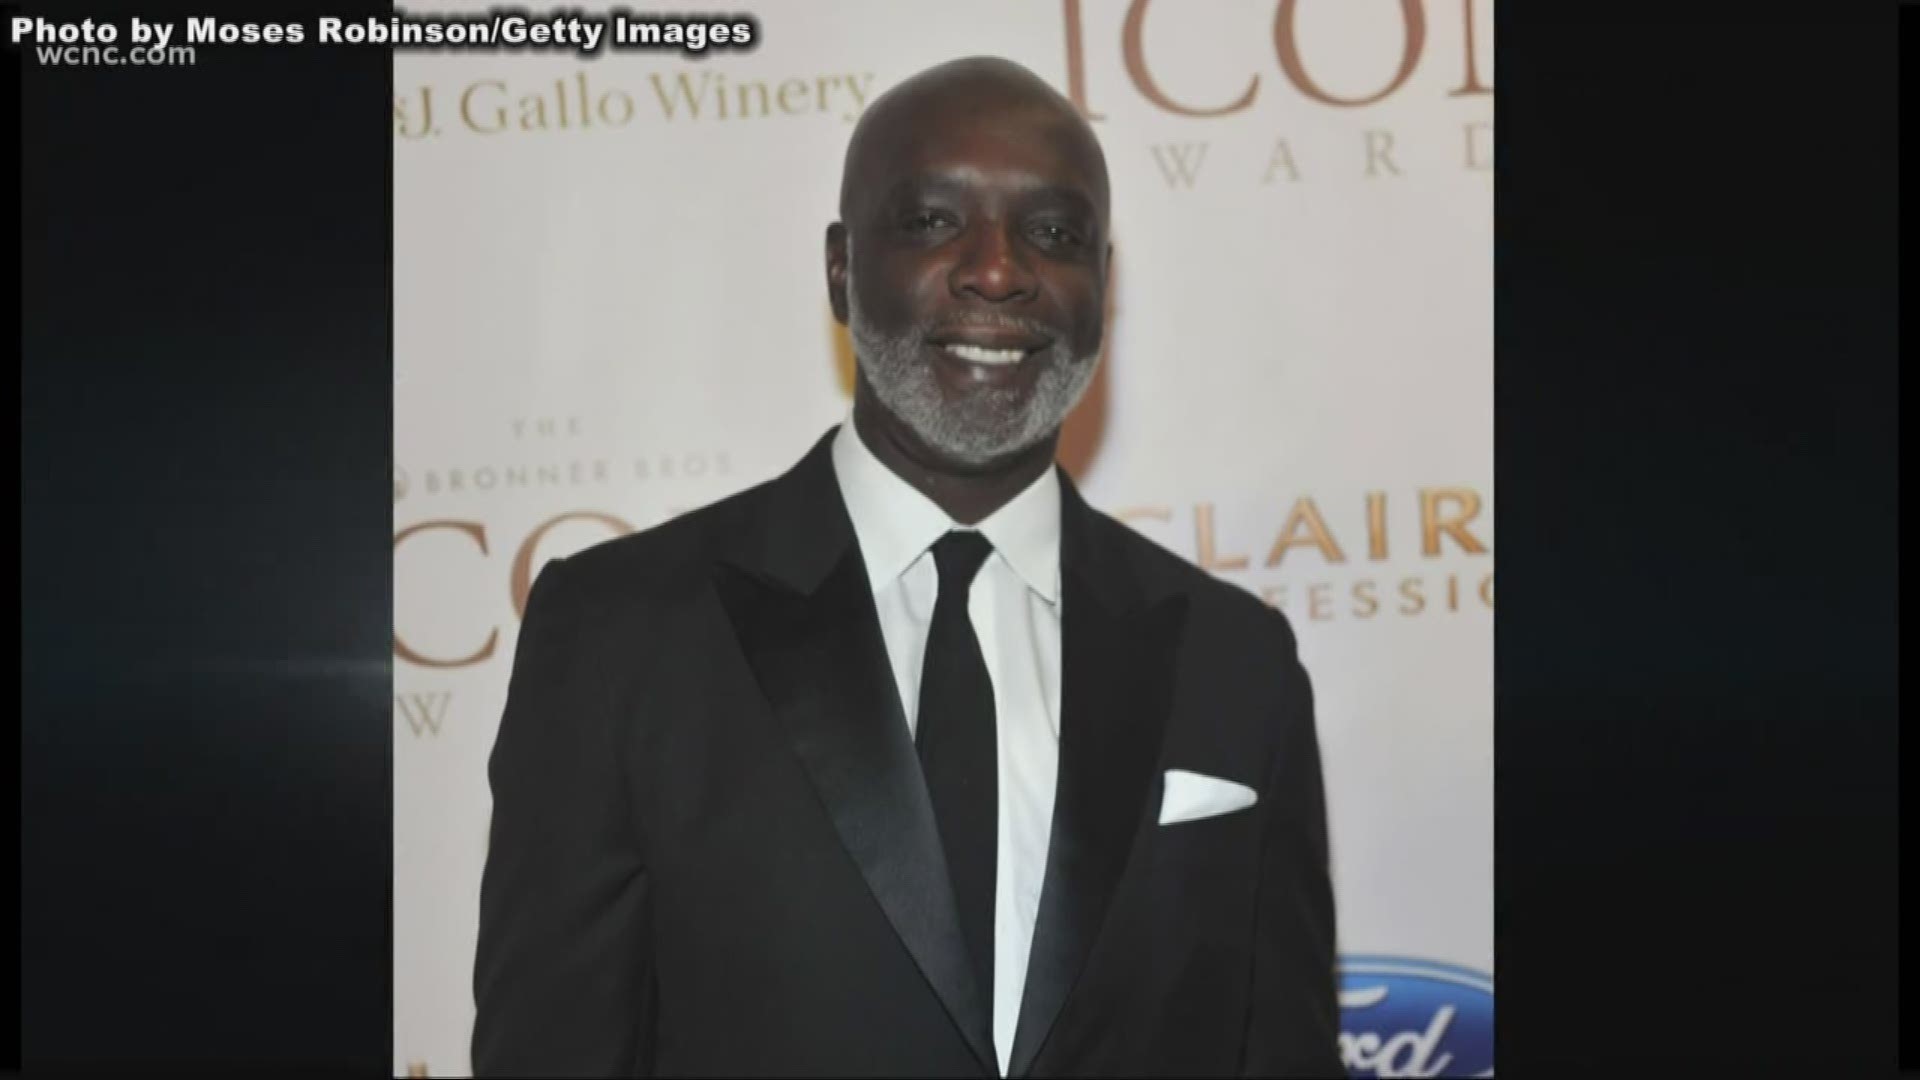 Peter Thomas, who was married to one of the stars of "The Real Housewives of Atlanta", now has a six-figure tax lien against his uptown bar, Sports ONE.